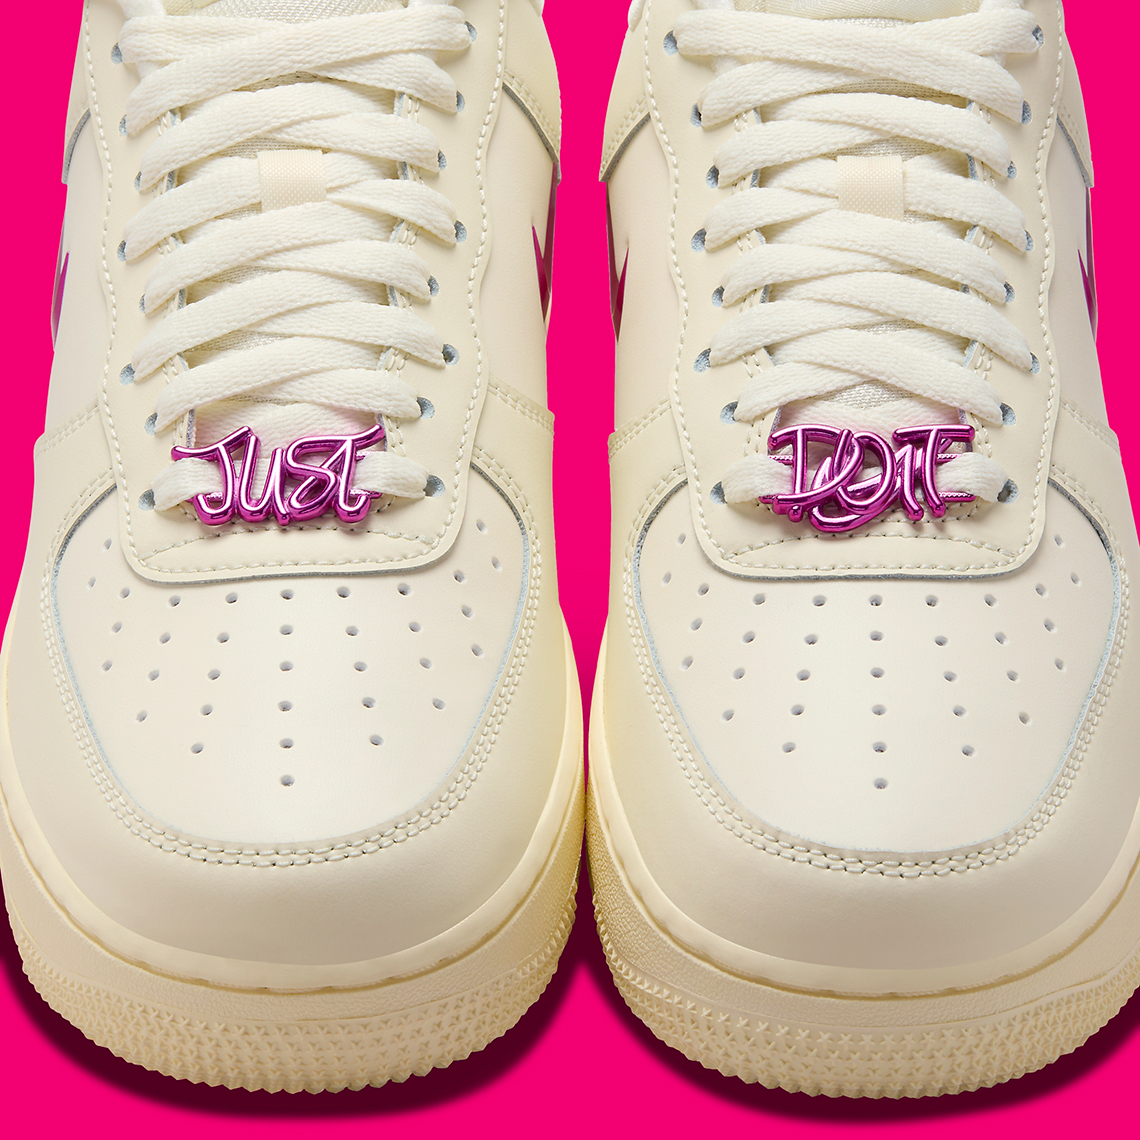 Nike Air Force 1 Low Just Do It Coconut Milk Playful Pink Alabaster Fb8251 101 8